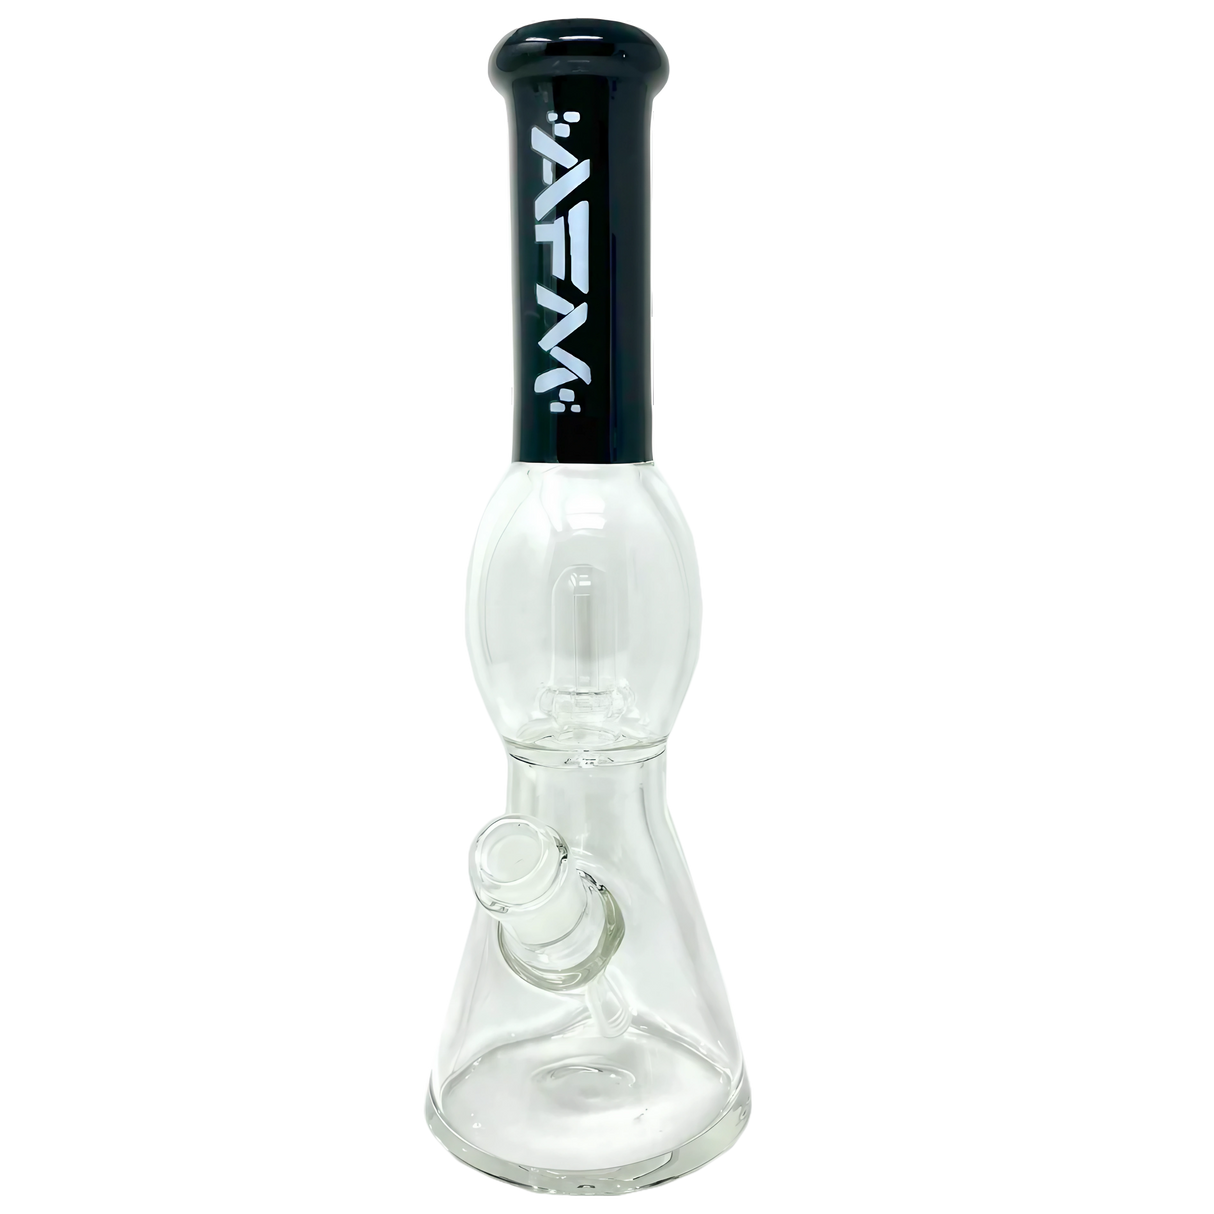 AFM The Ufo 12" Beaker Bong with Ice Pinches, 5" Downstem, and Showerhead Percolator - Front View